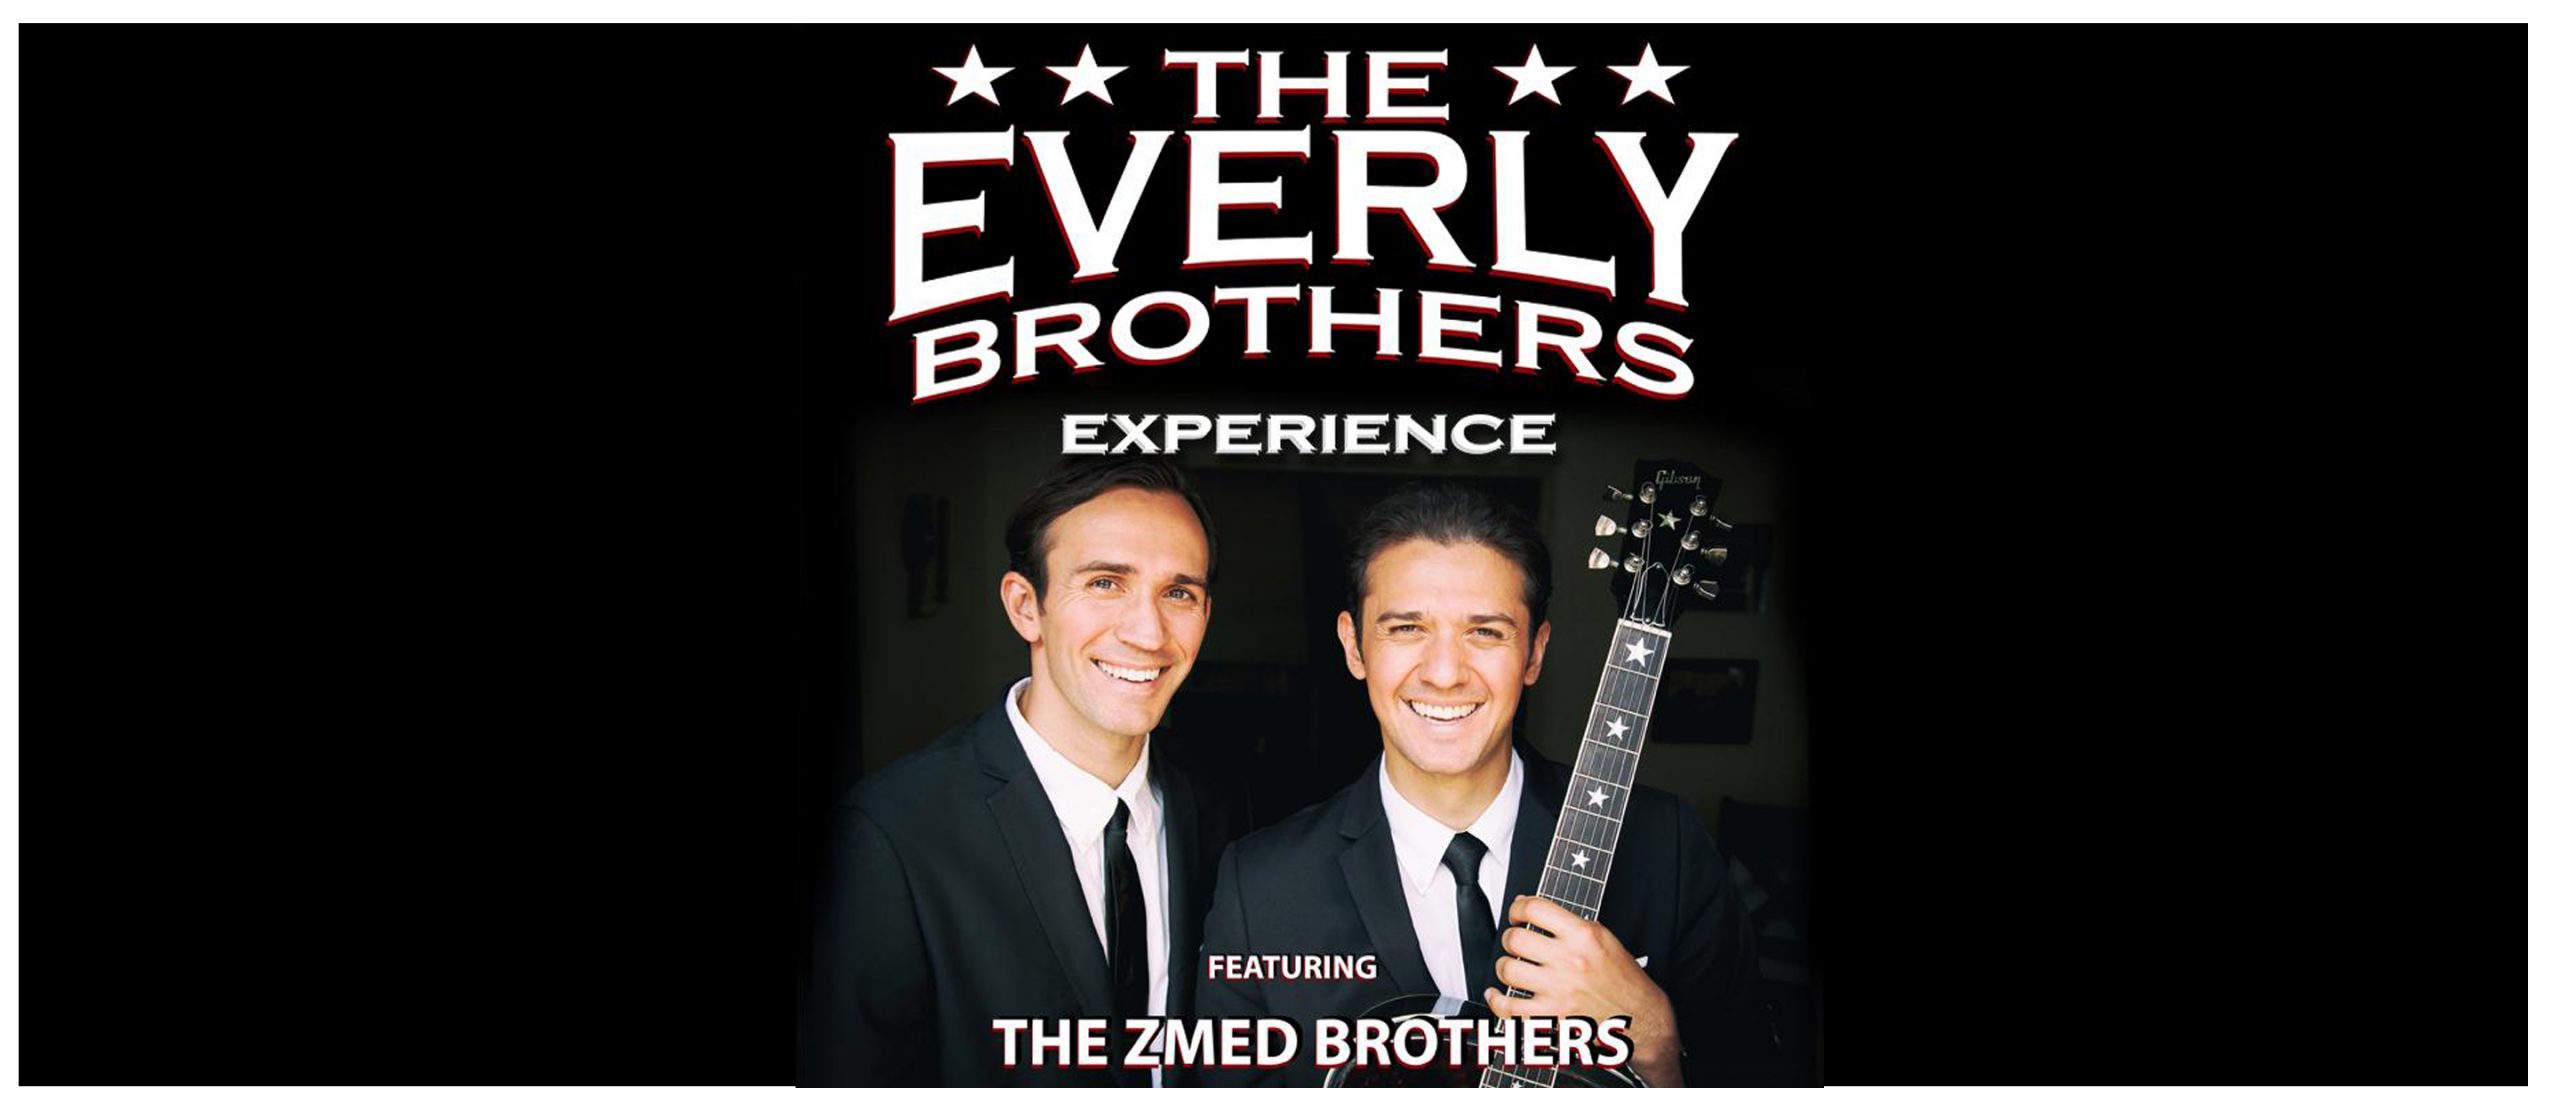 The Everly Brothers Experiences ft. The Zmed Brothers